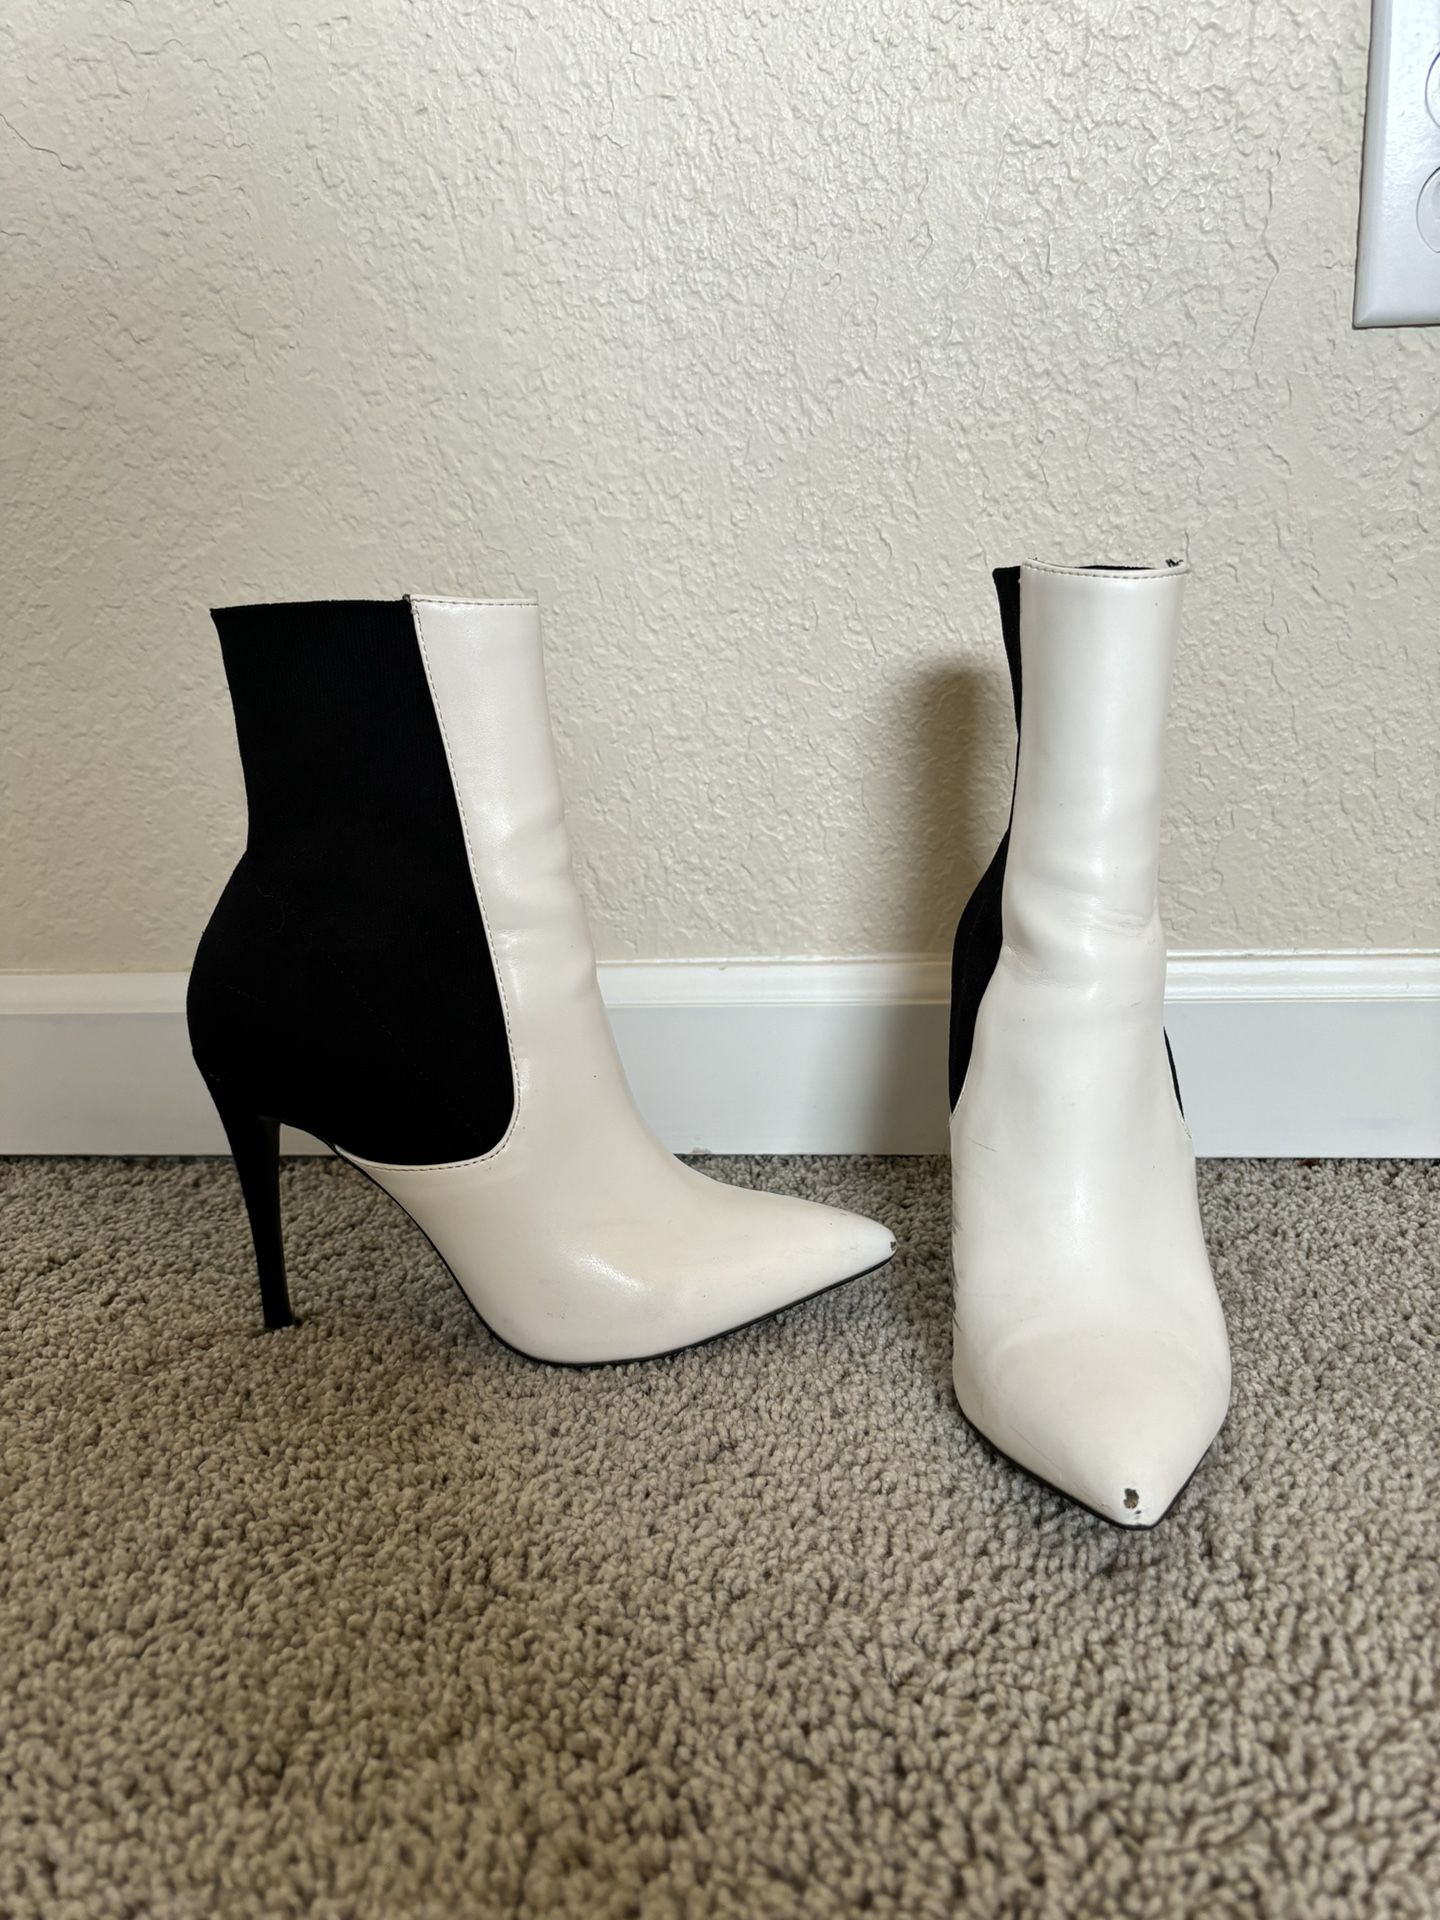 Steve Madden Stiletto Heels Booties - Color Block Black And White - Size 7 .5